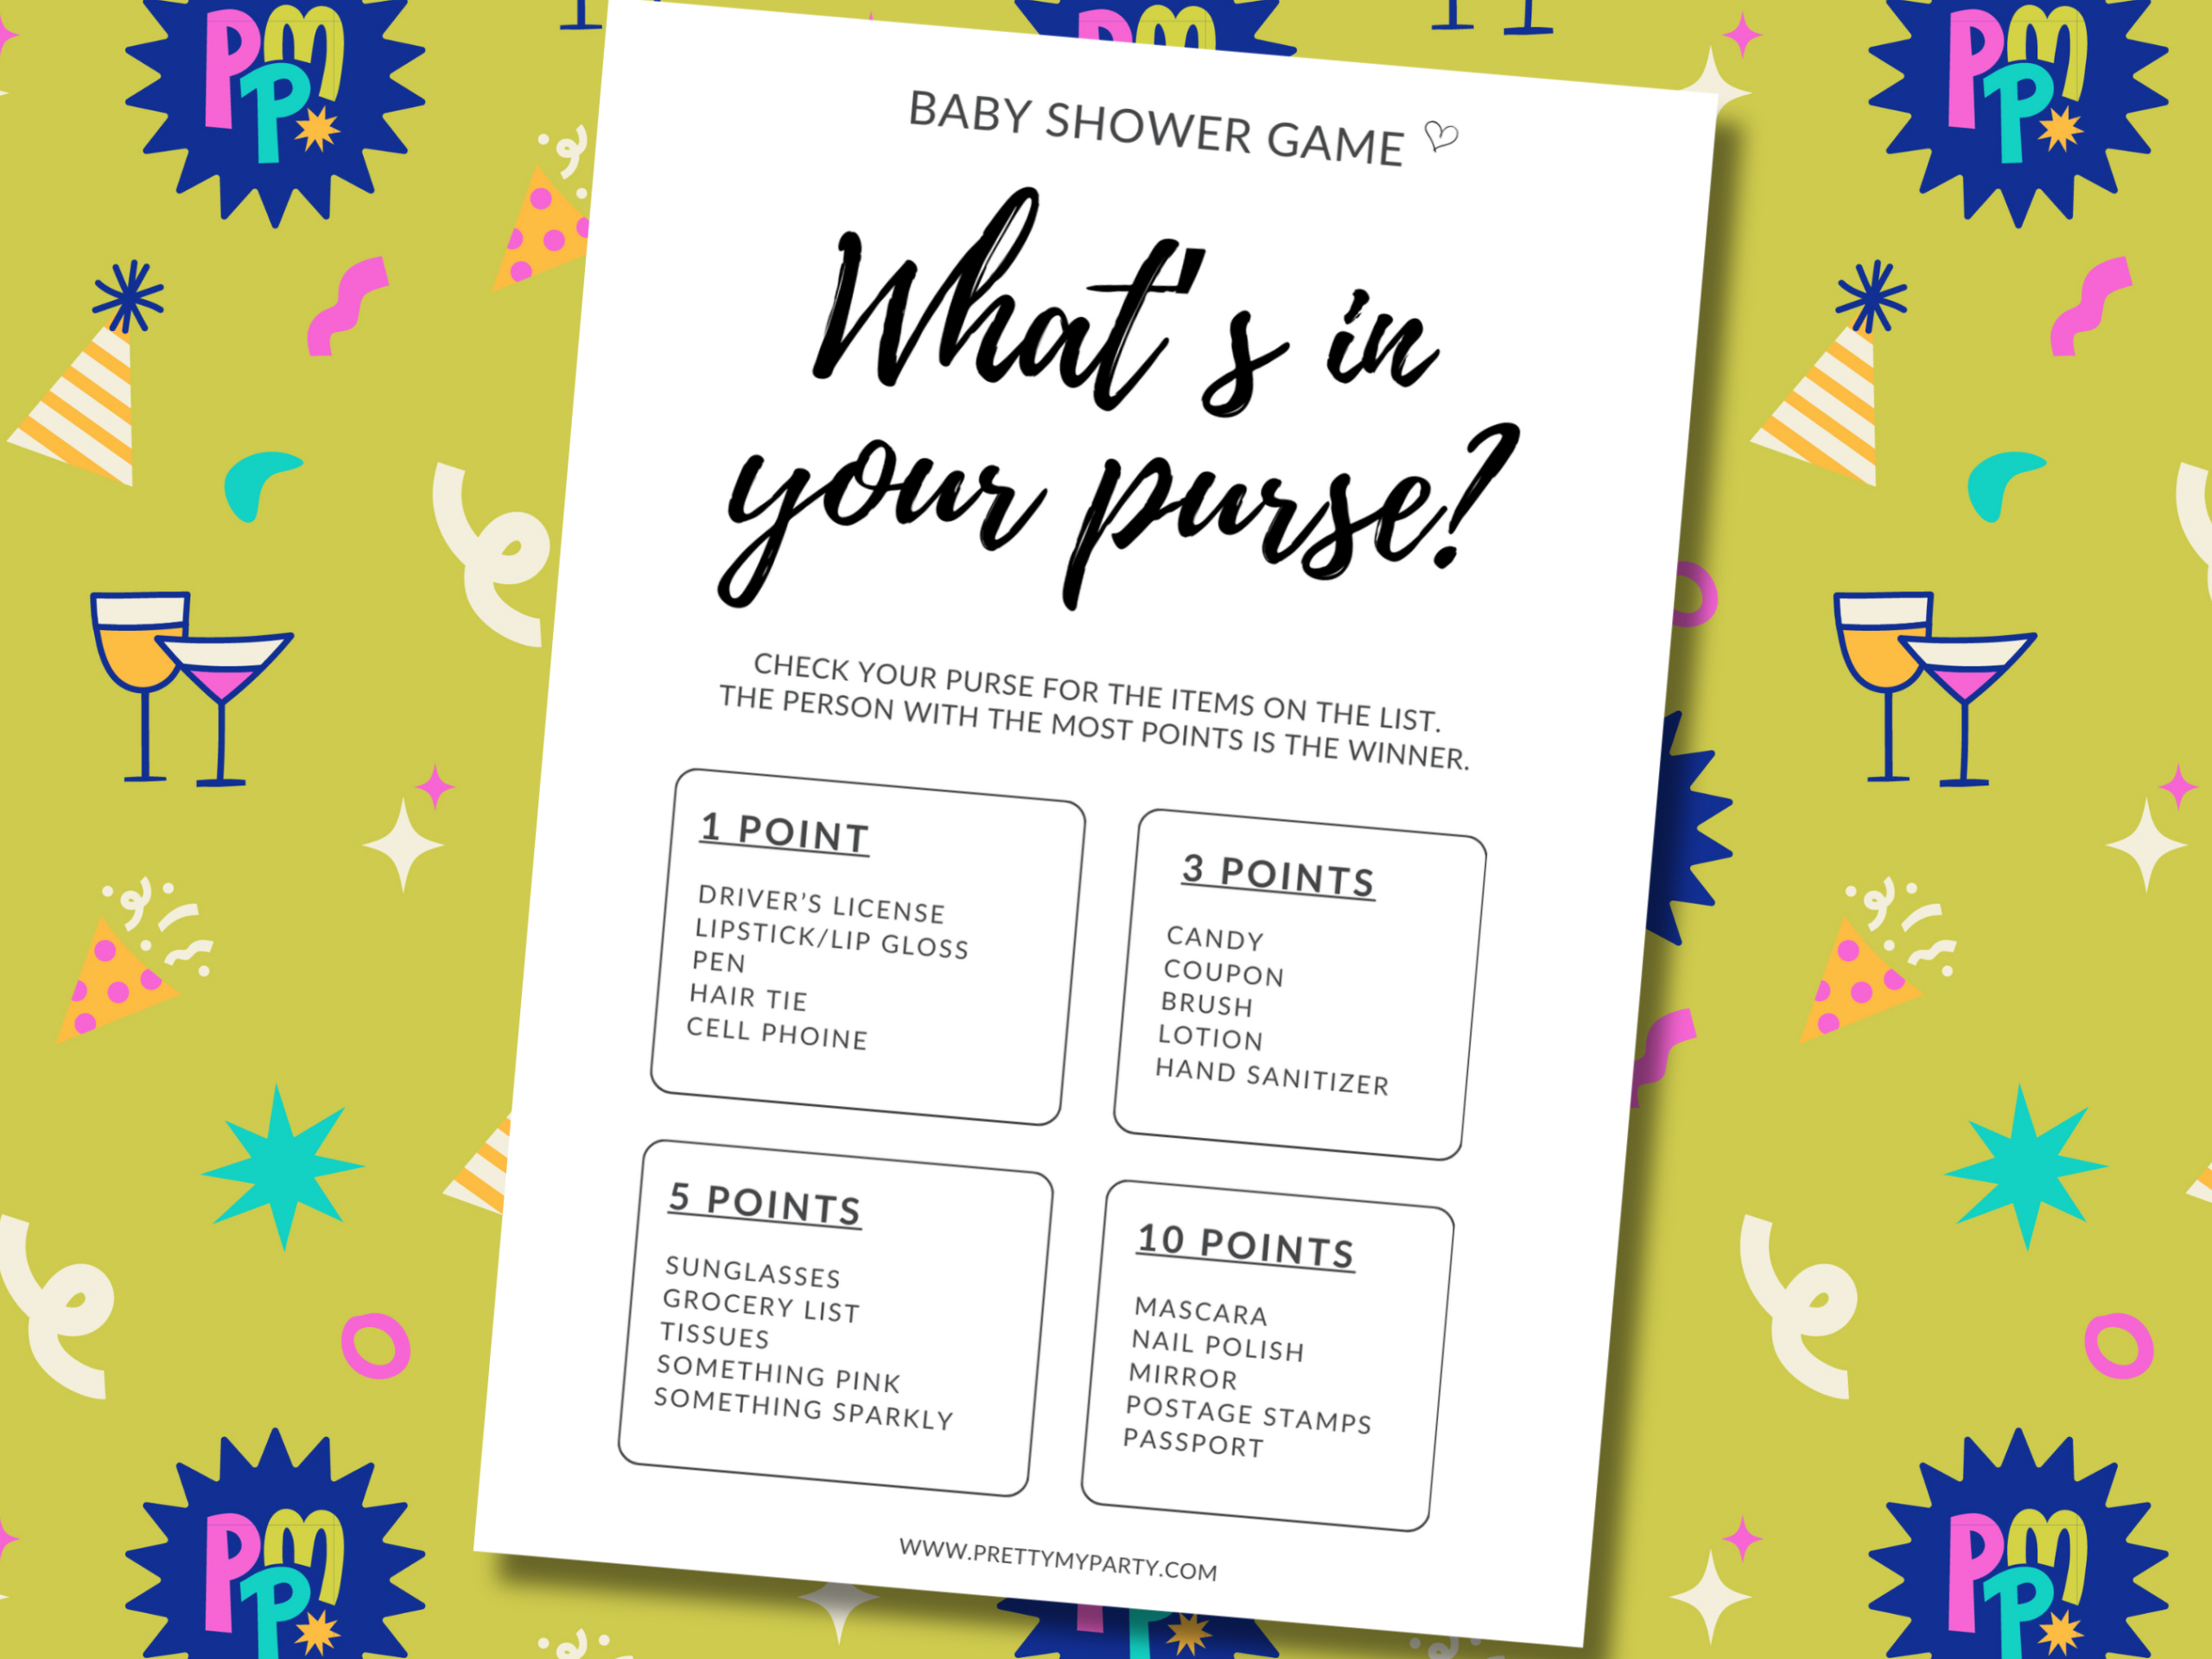 Easy To Play And Free Printable Baby Shower Games - Pretty My Party with regard to Free Printable Baby Shower Game What&amp;amp;#039;S In Your Purse